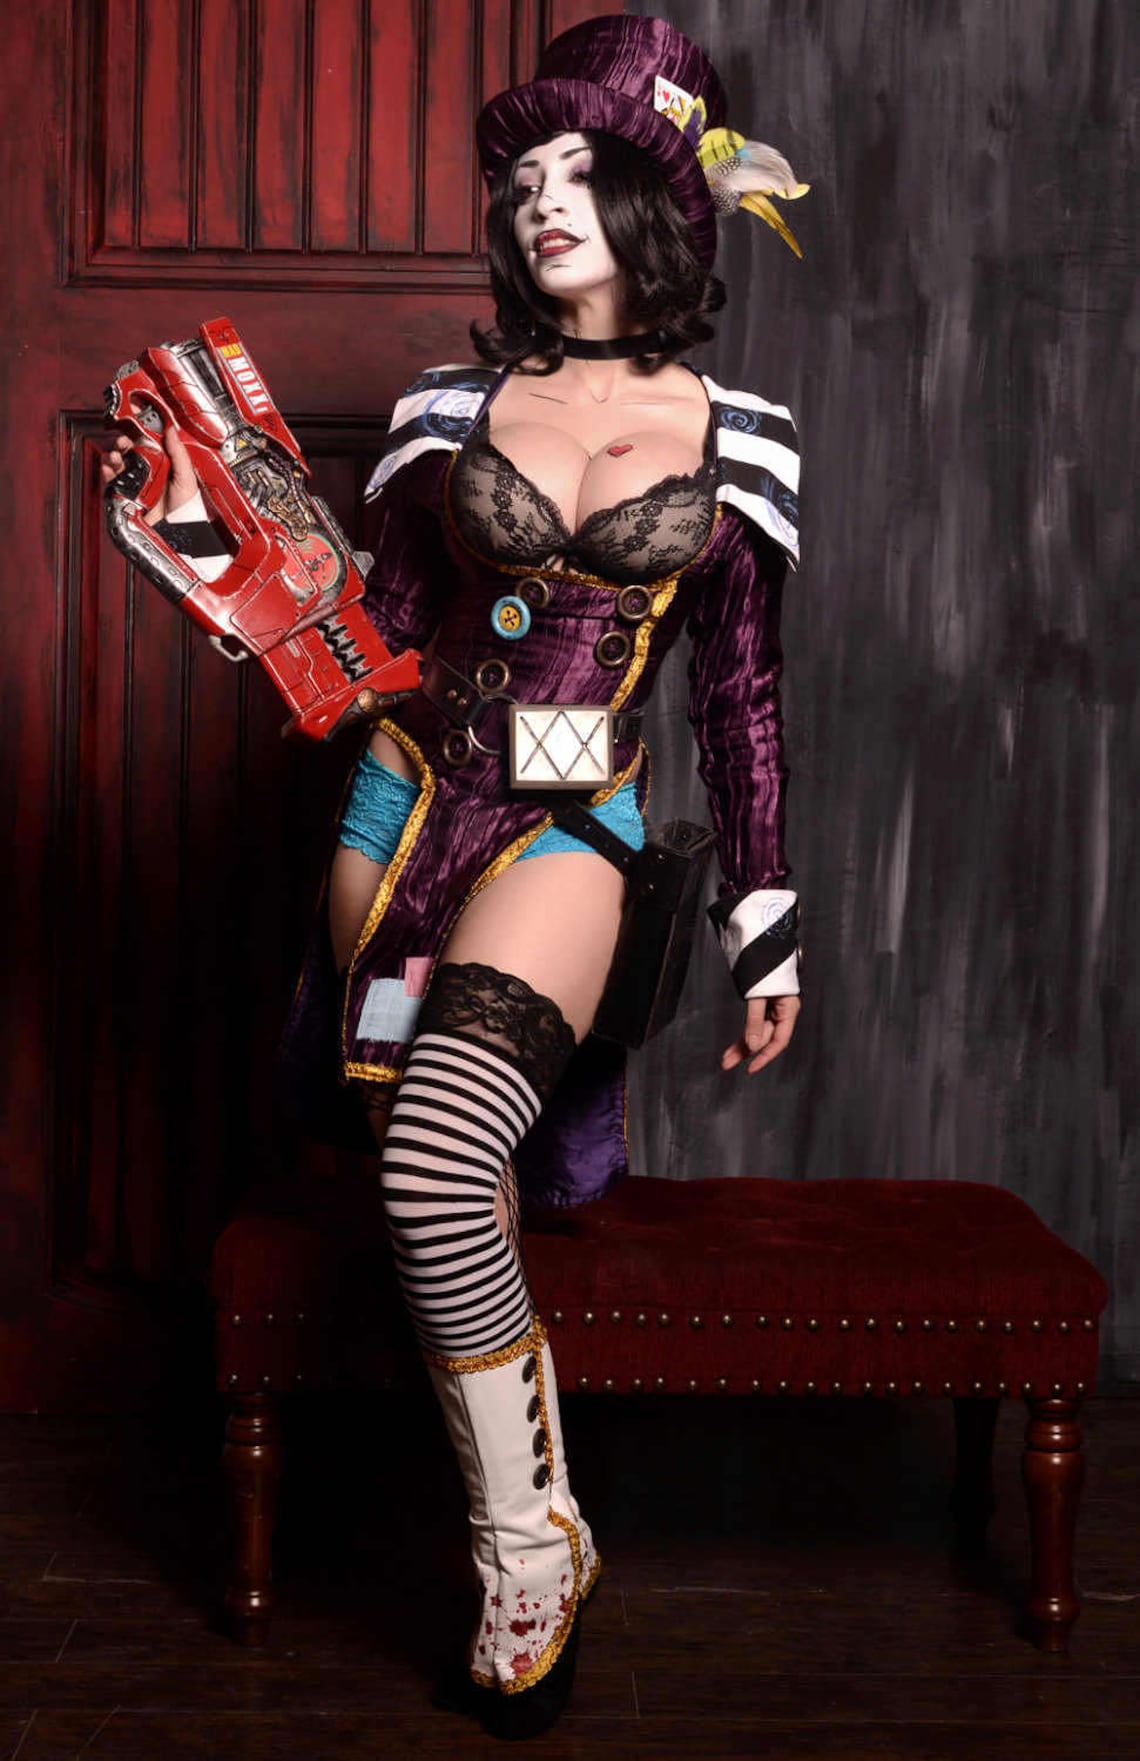 Mad Moxxi Pose 11x17 Poster Print Signed By Vivid Vivka Etsy